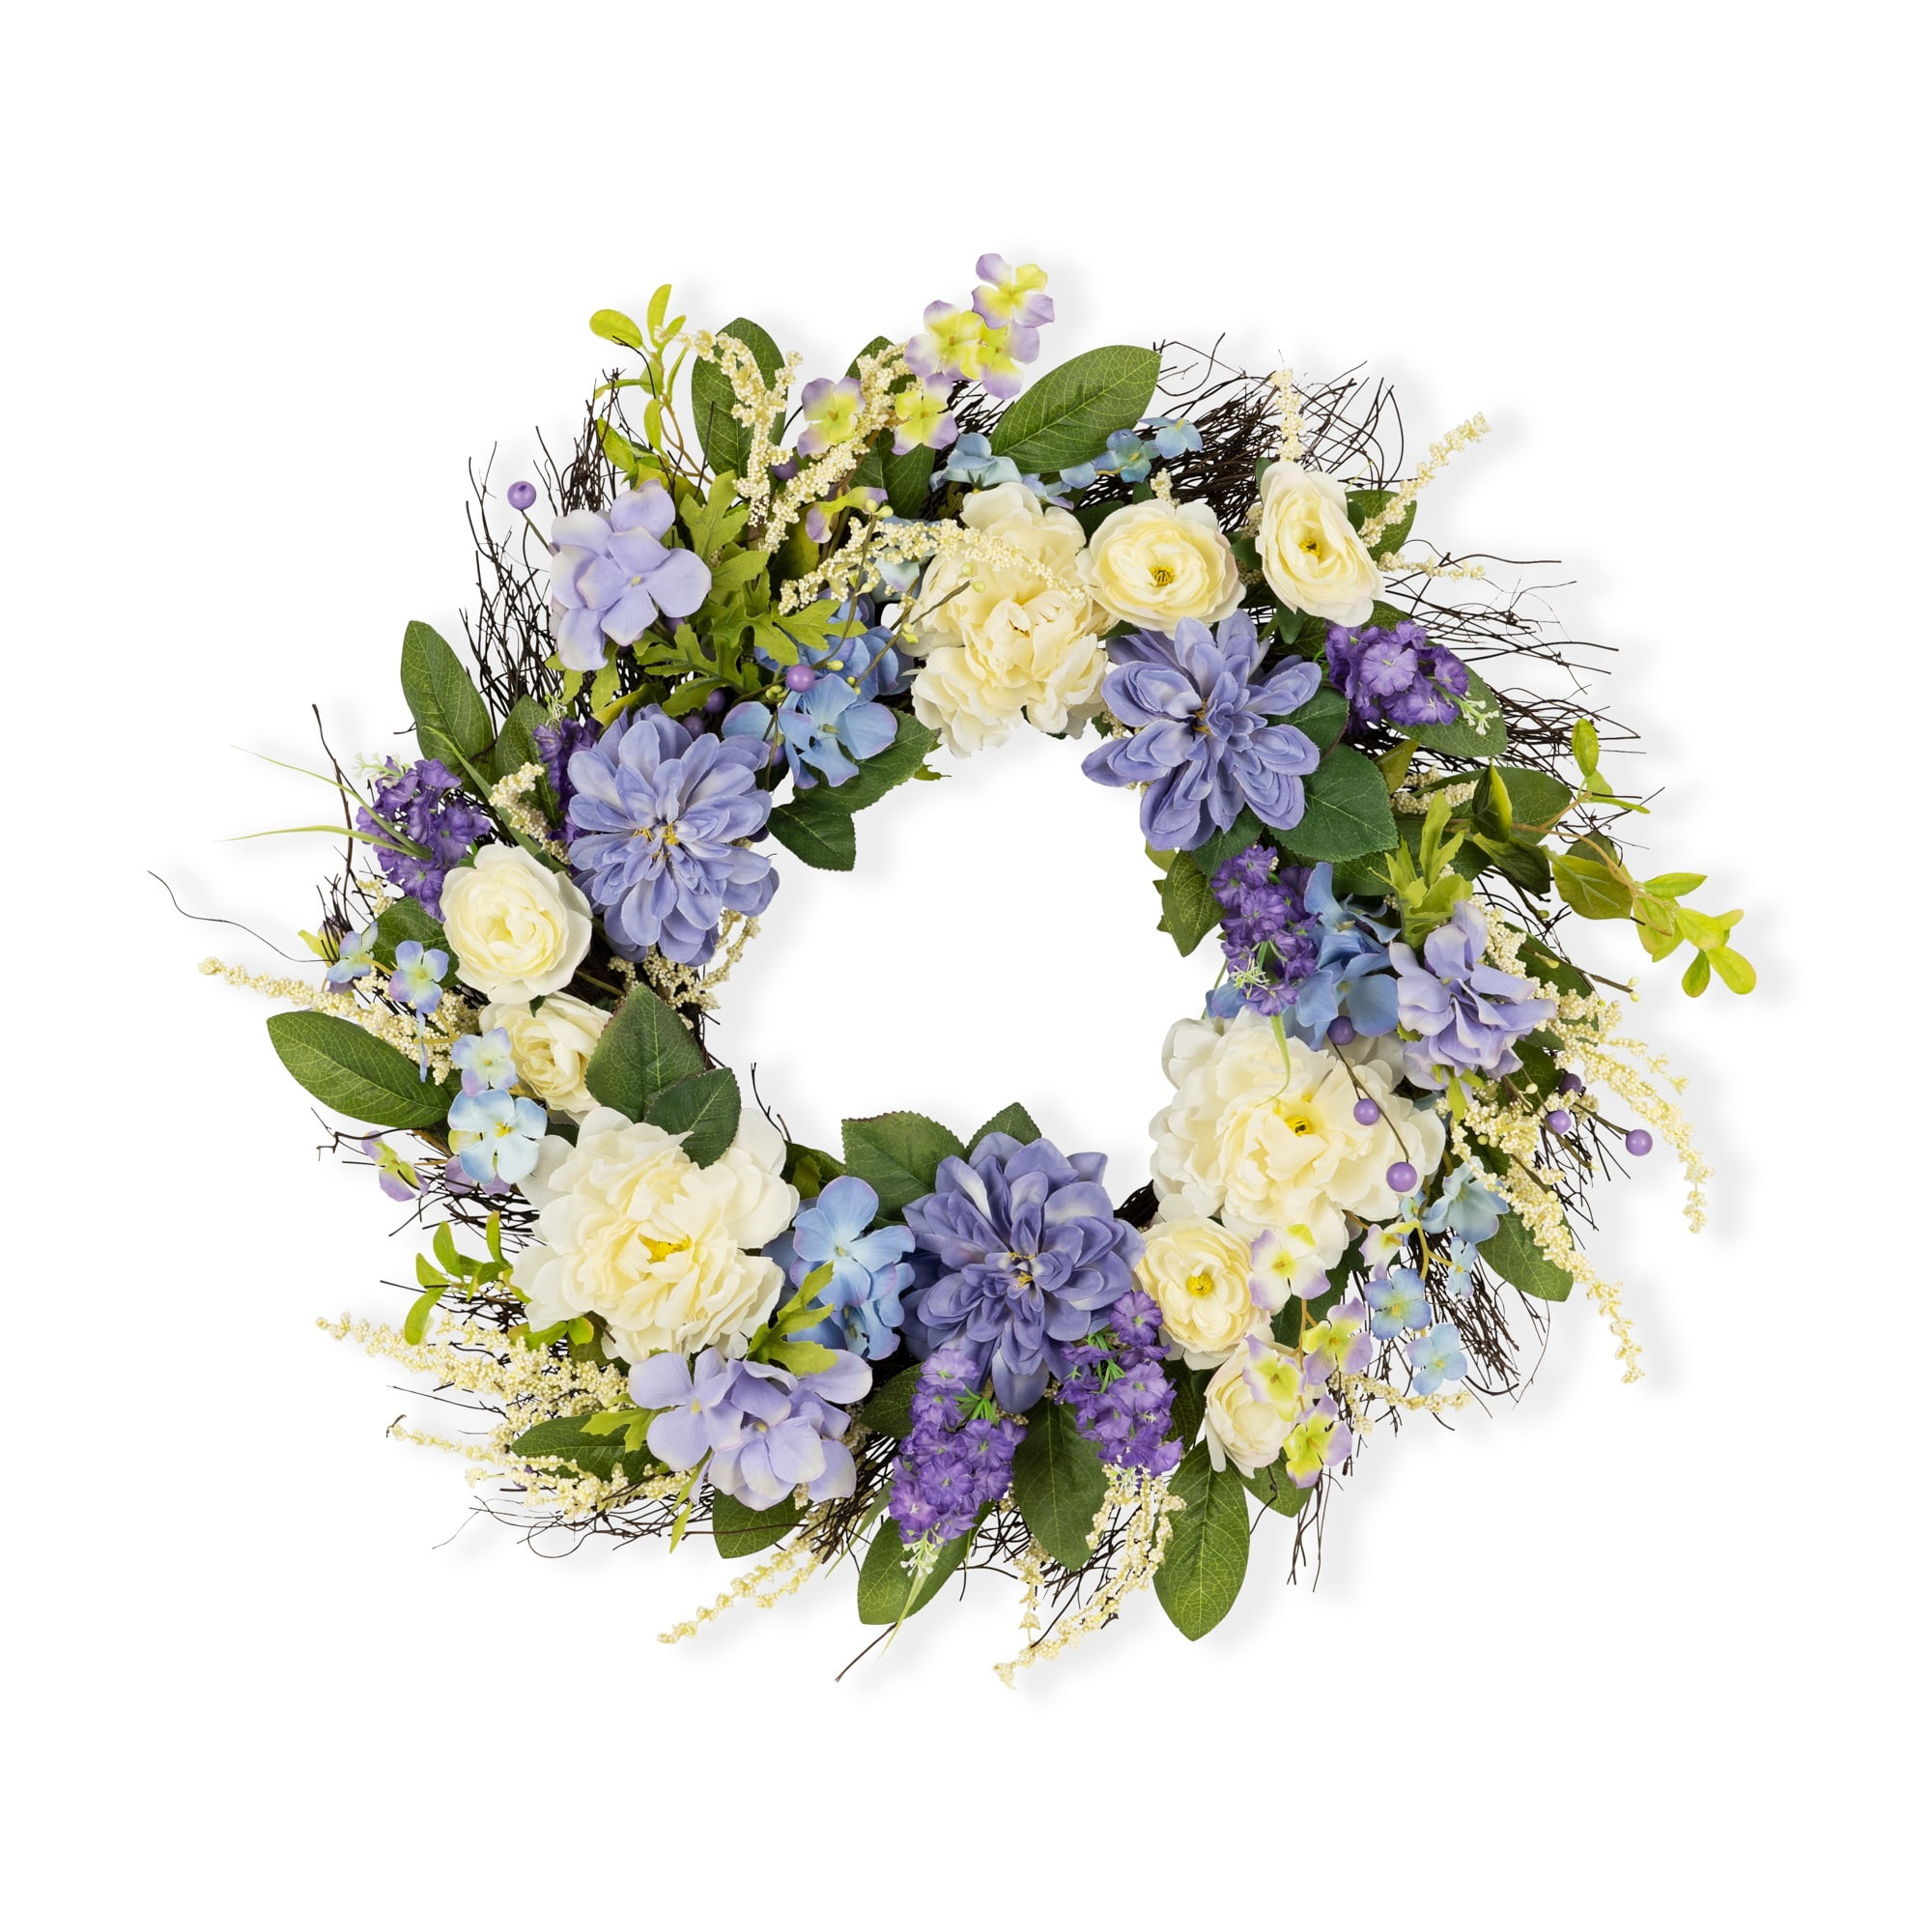 Mixed Floral Wreath 27"D Twig/Fabric